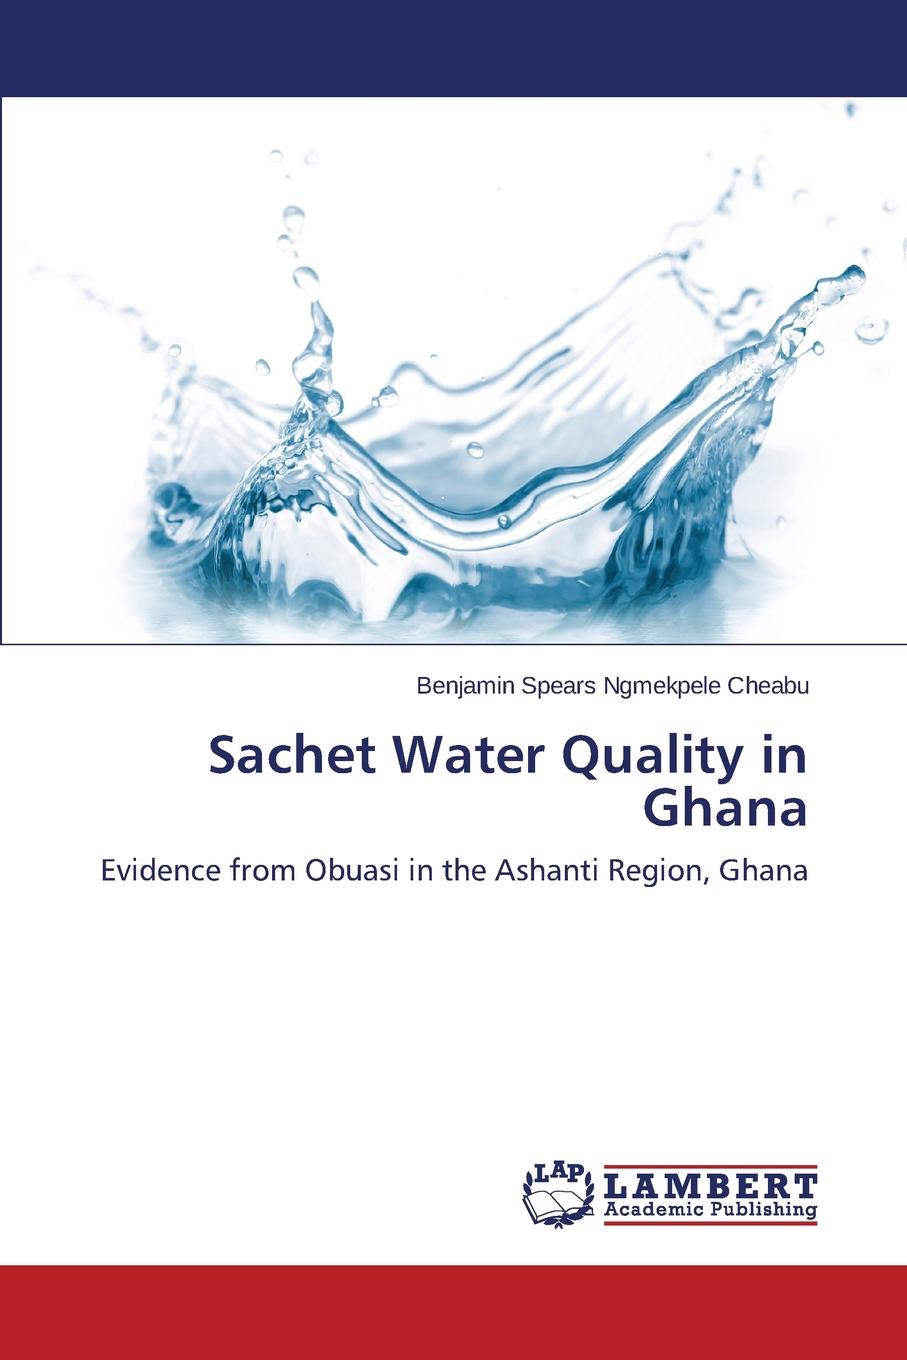 literature review on sachet water